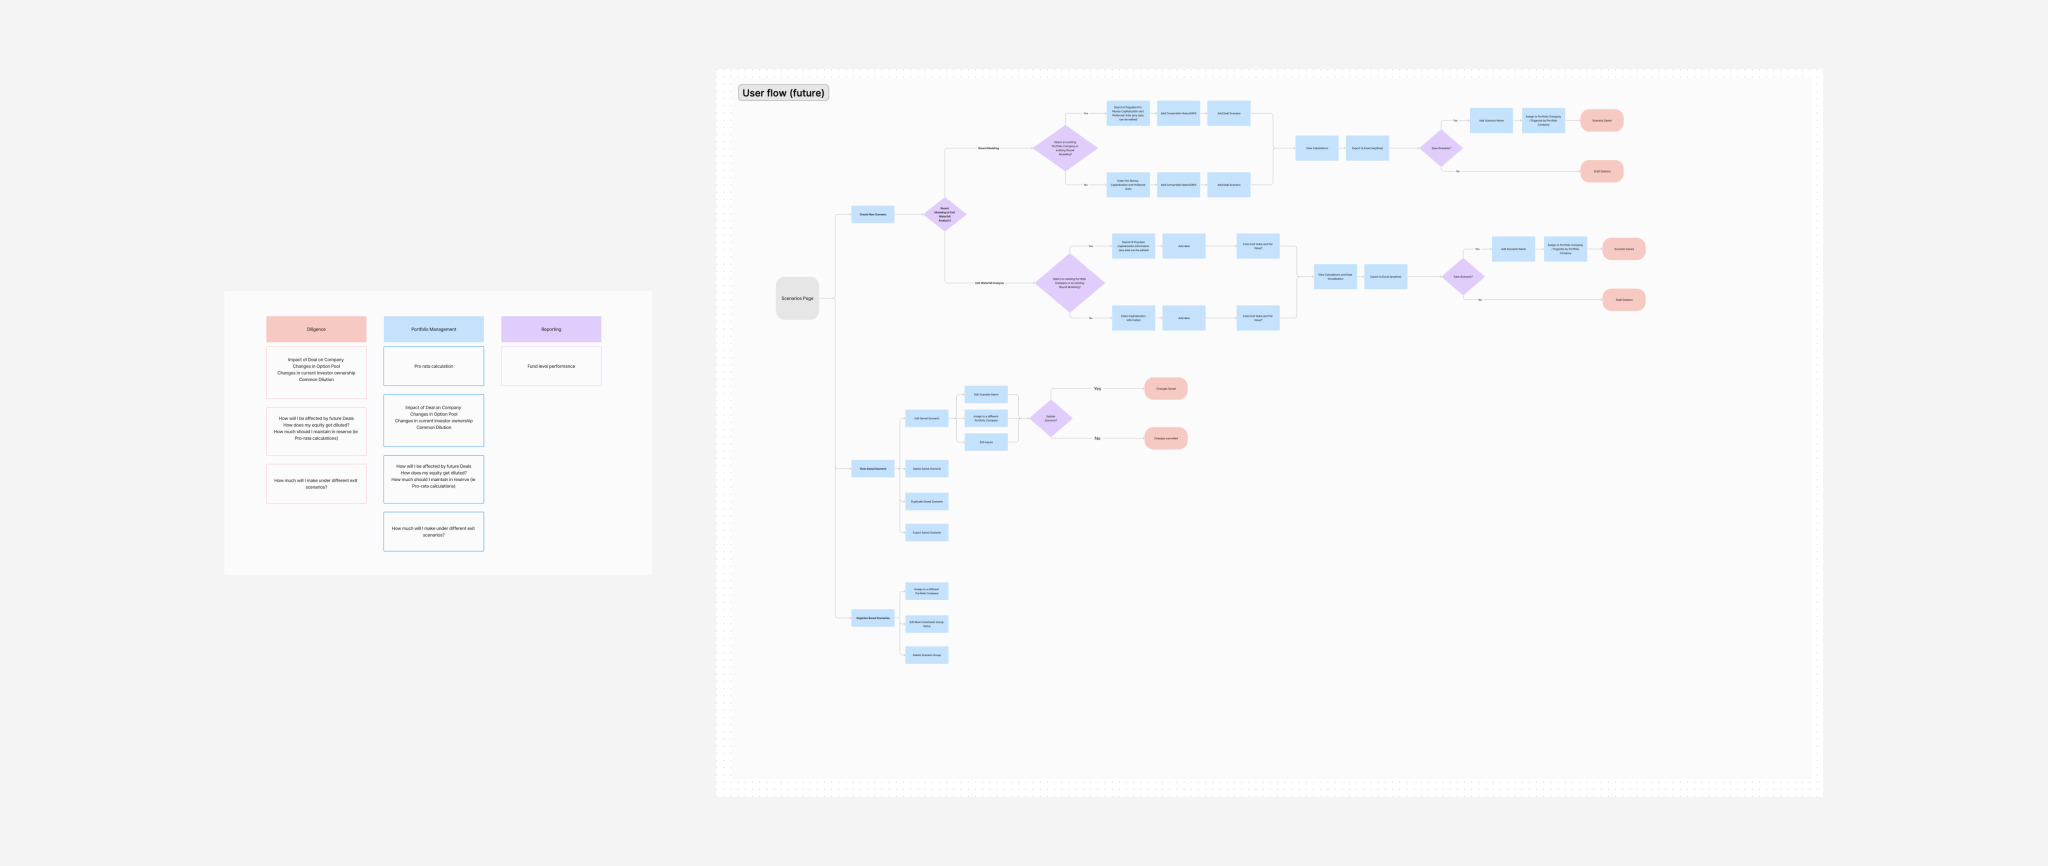 mapping out future user flows